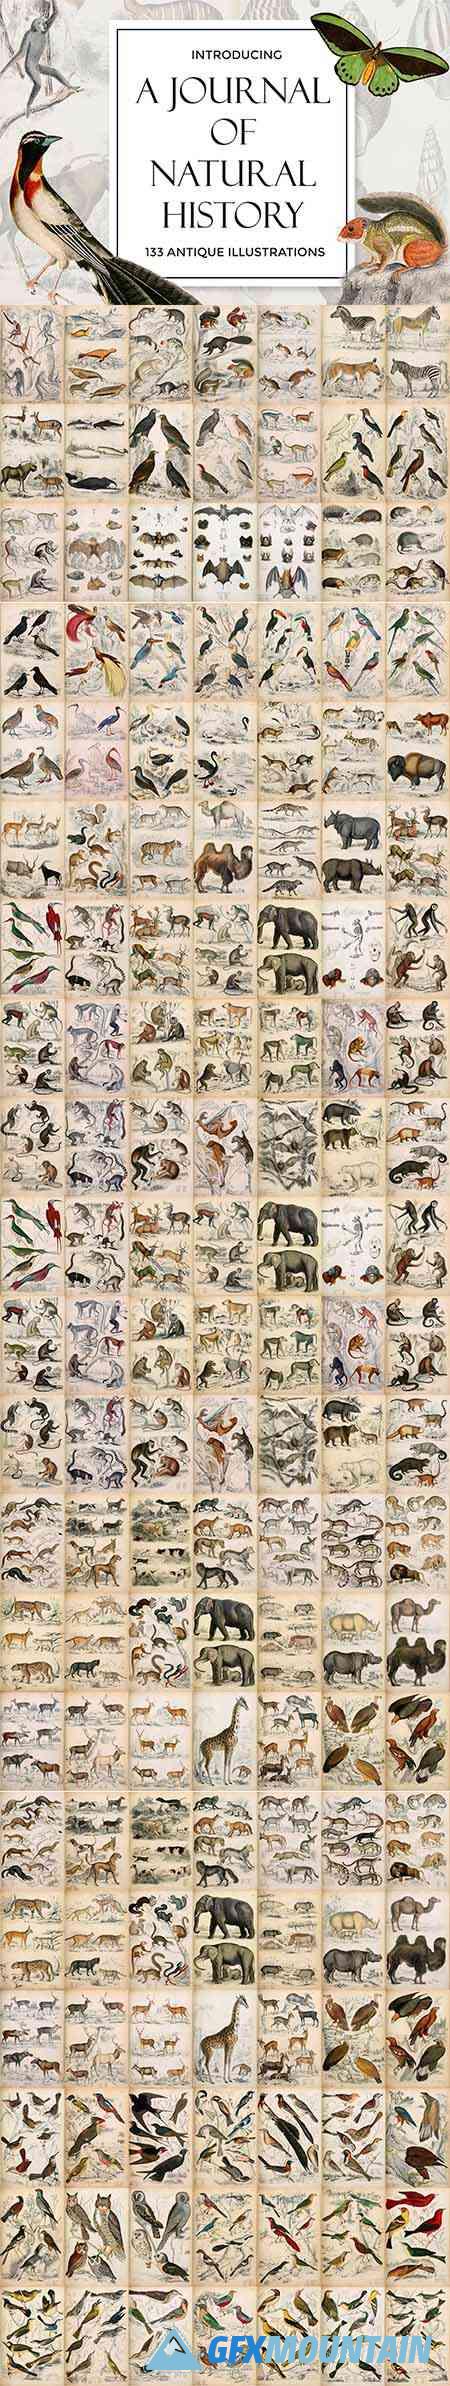 A Journal of Natural History Illustrations